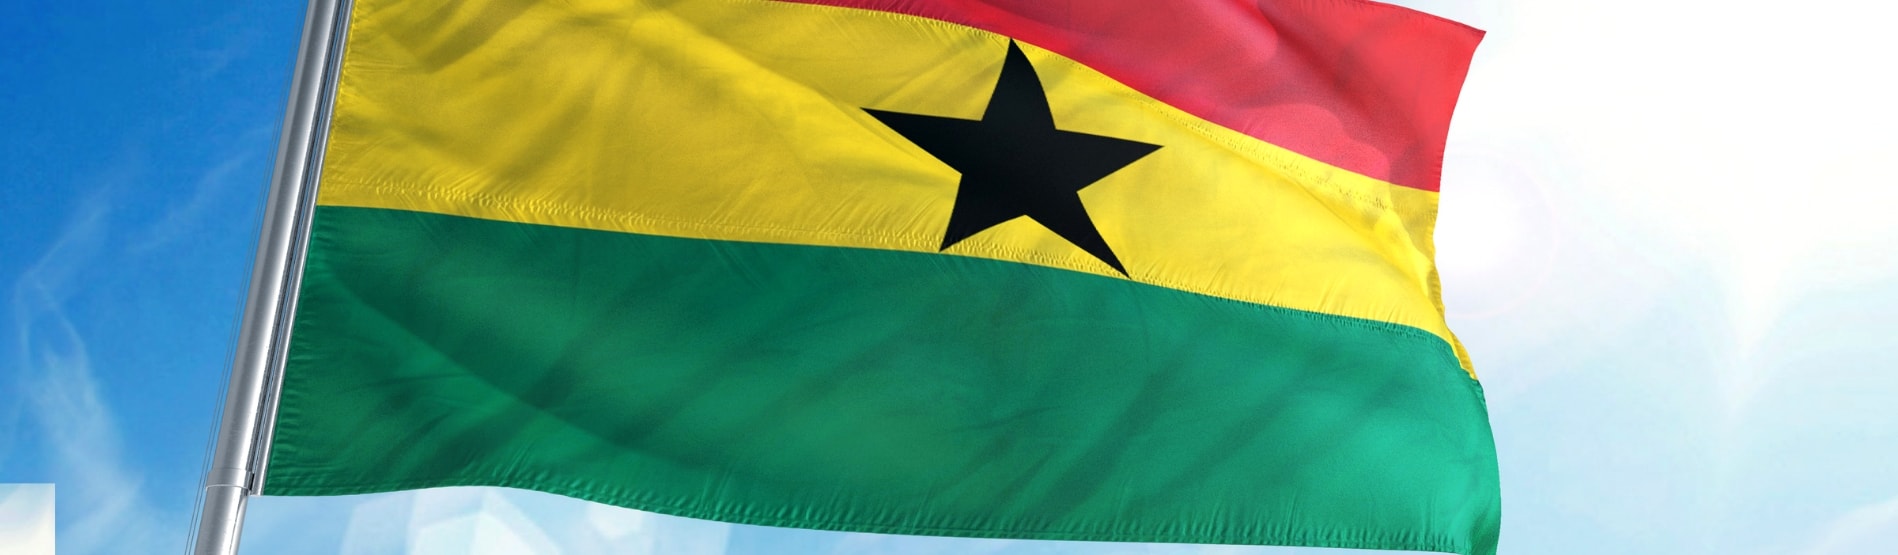 Ghanaian flag blowing in the breeze.